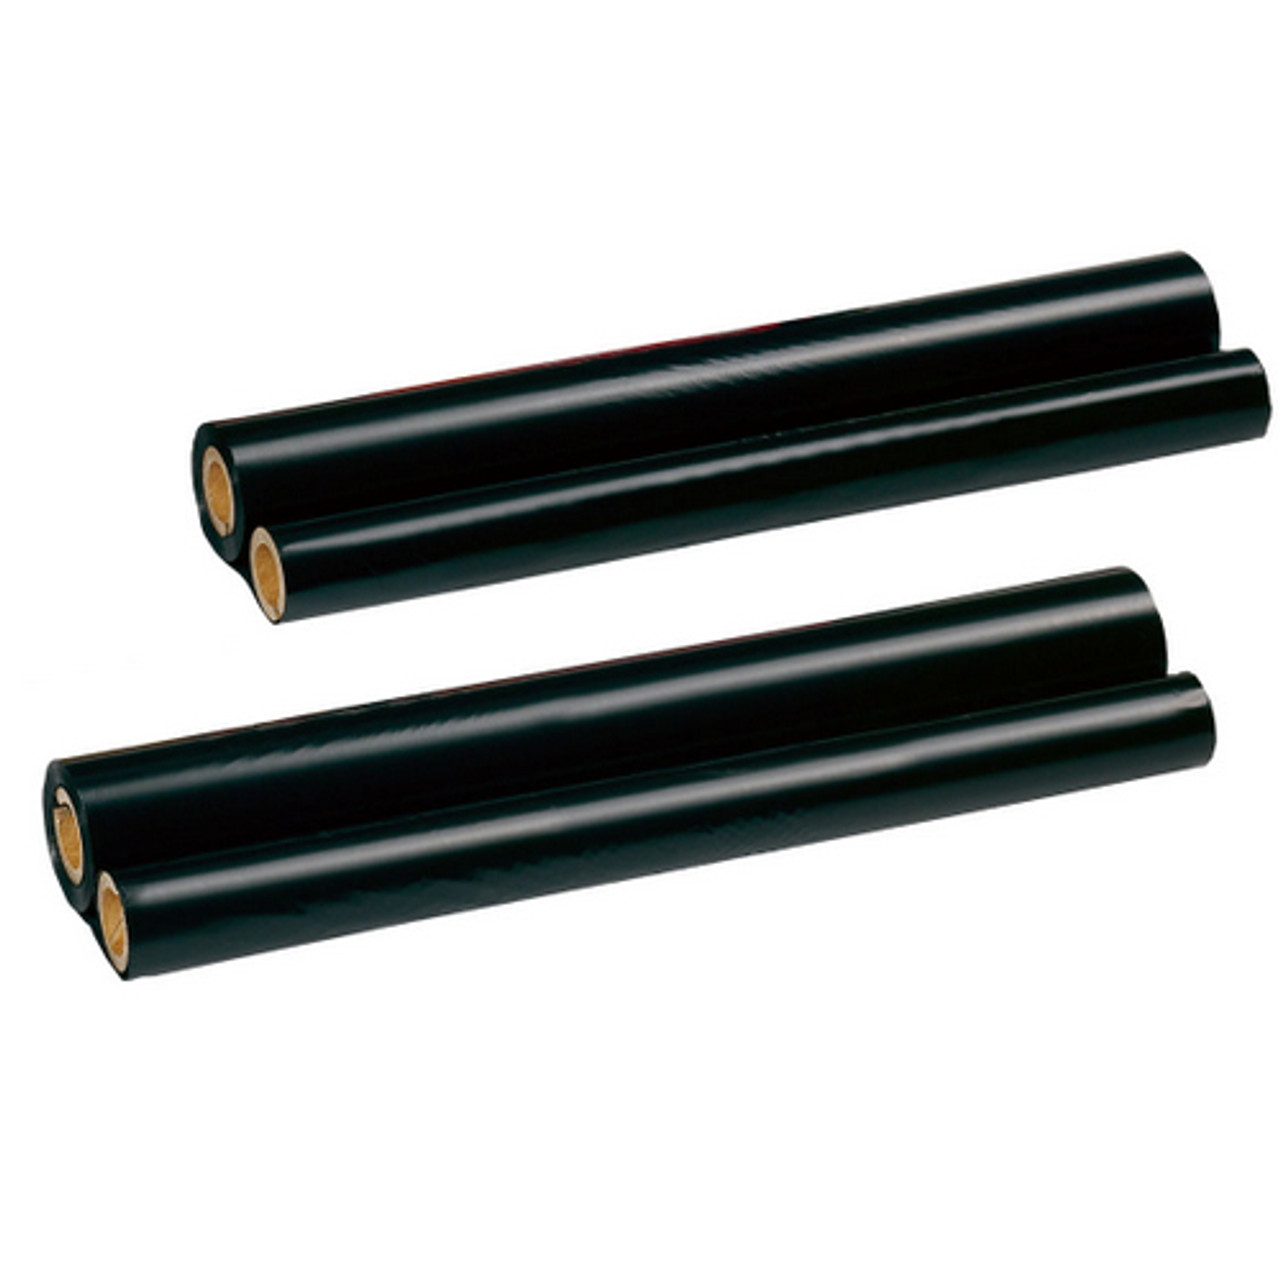 Sharp UX-3CR Thermal Compatible Fax Ribbon Refill Rolls 2 - Pack